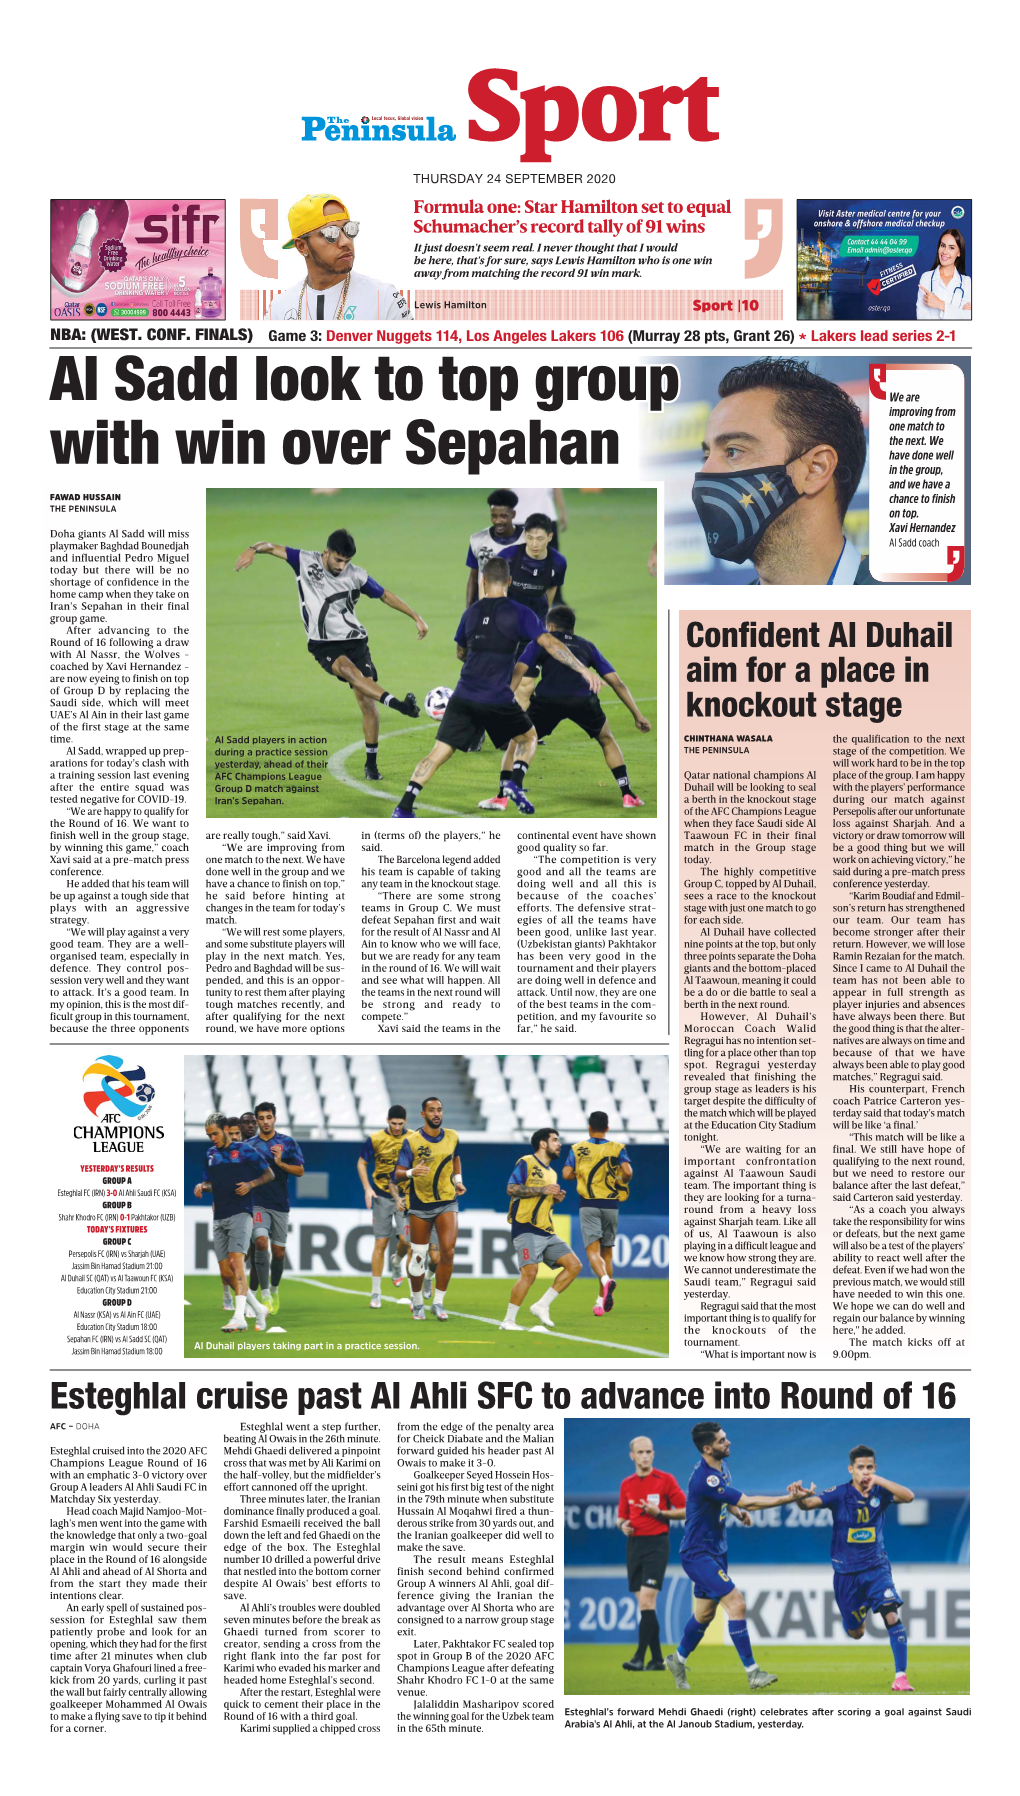 Al Sadd Look to Top Group with Win Over Sepahan